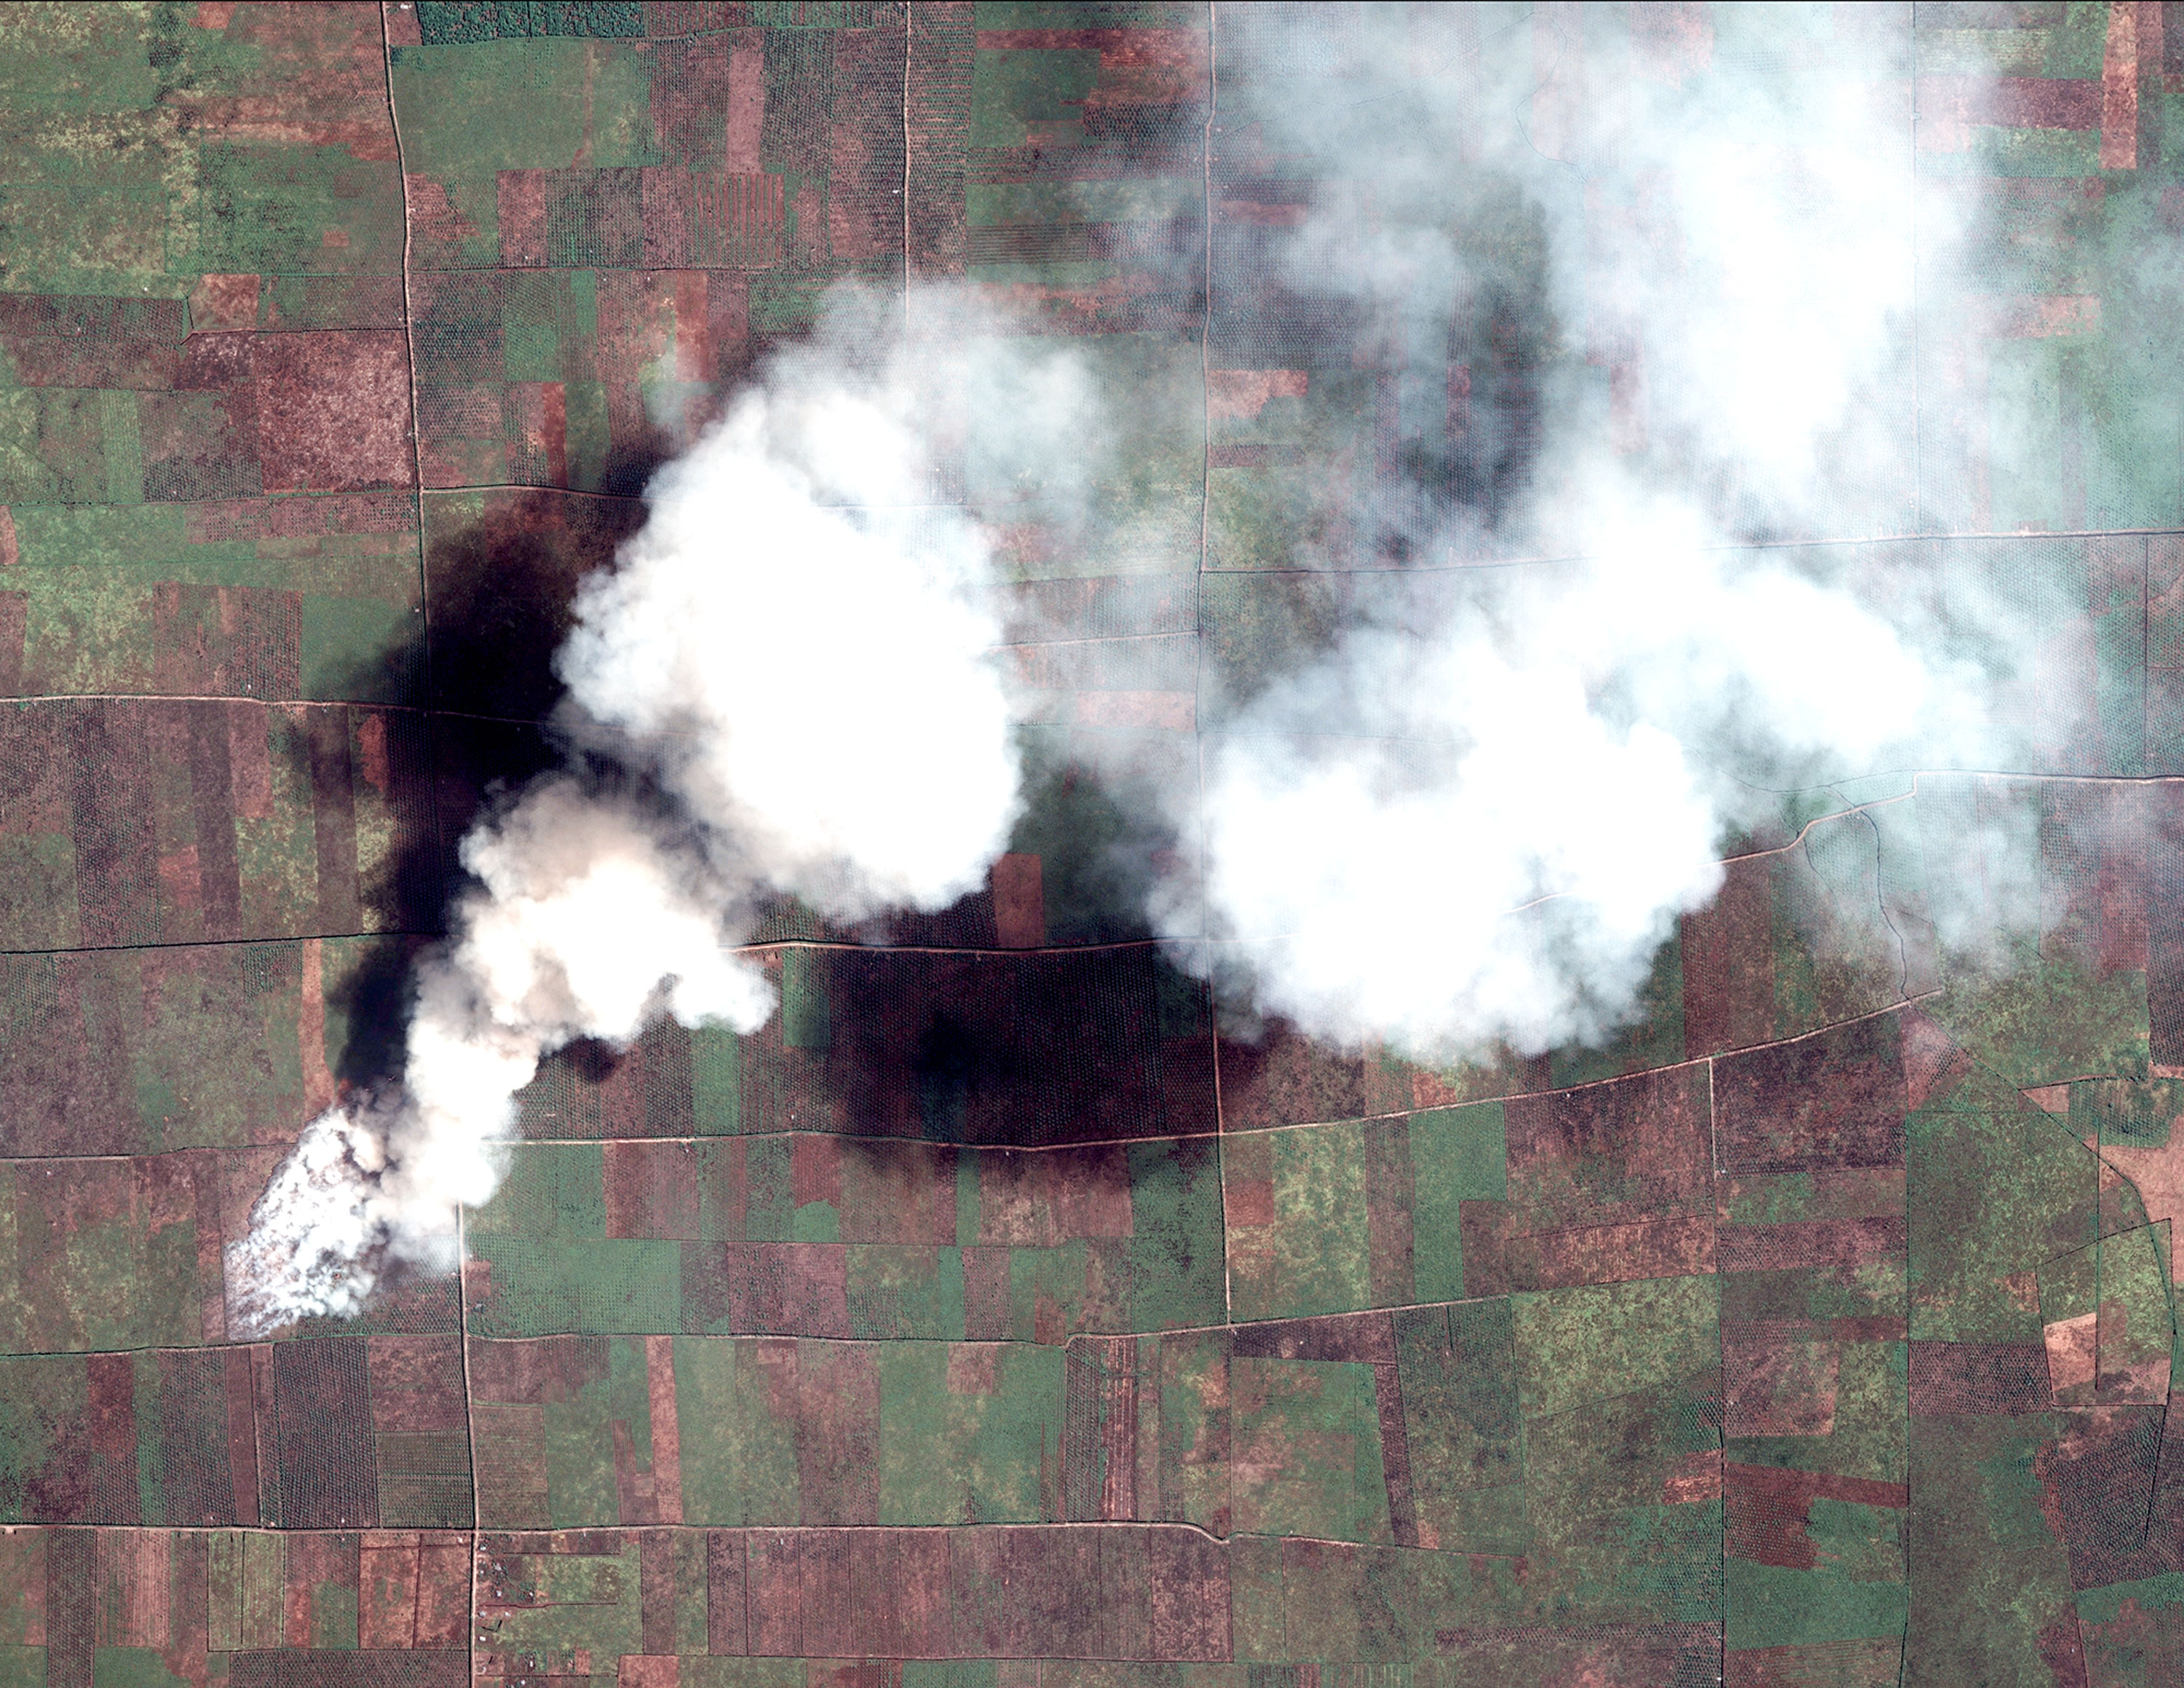 Agricultural fire in Sumatra, Indonesia, made available through a partnership between Global Forest Watch Fires and Digital Globe.